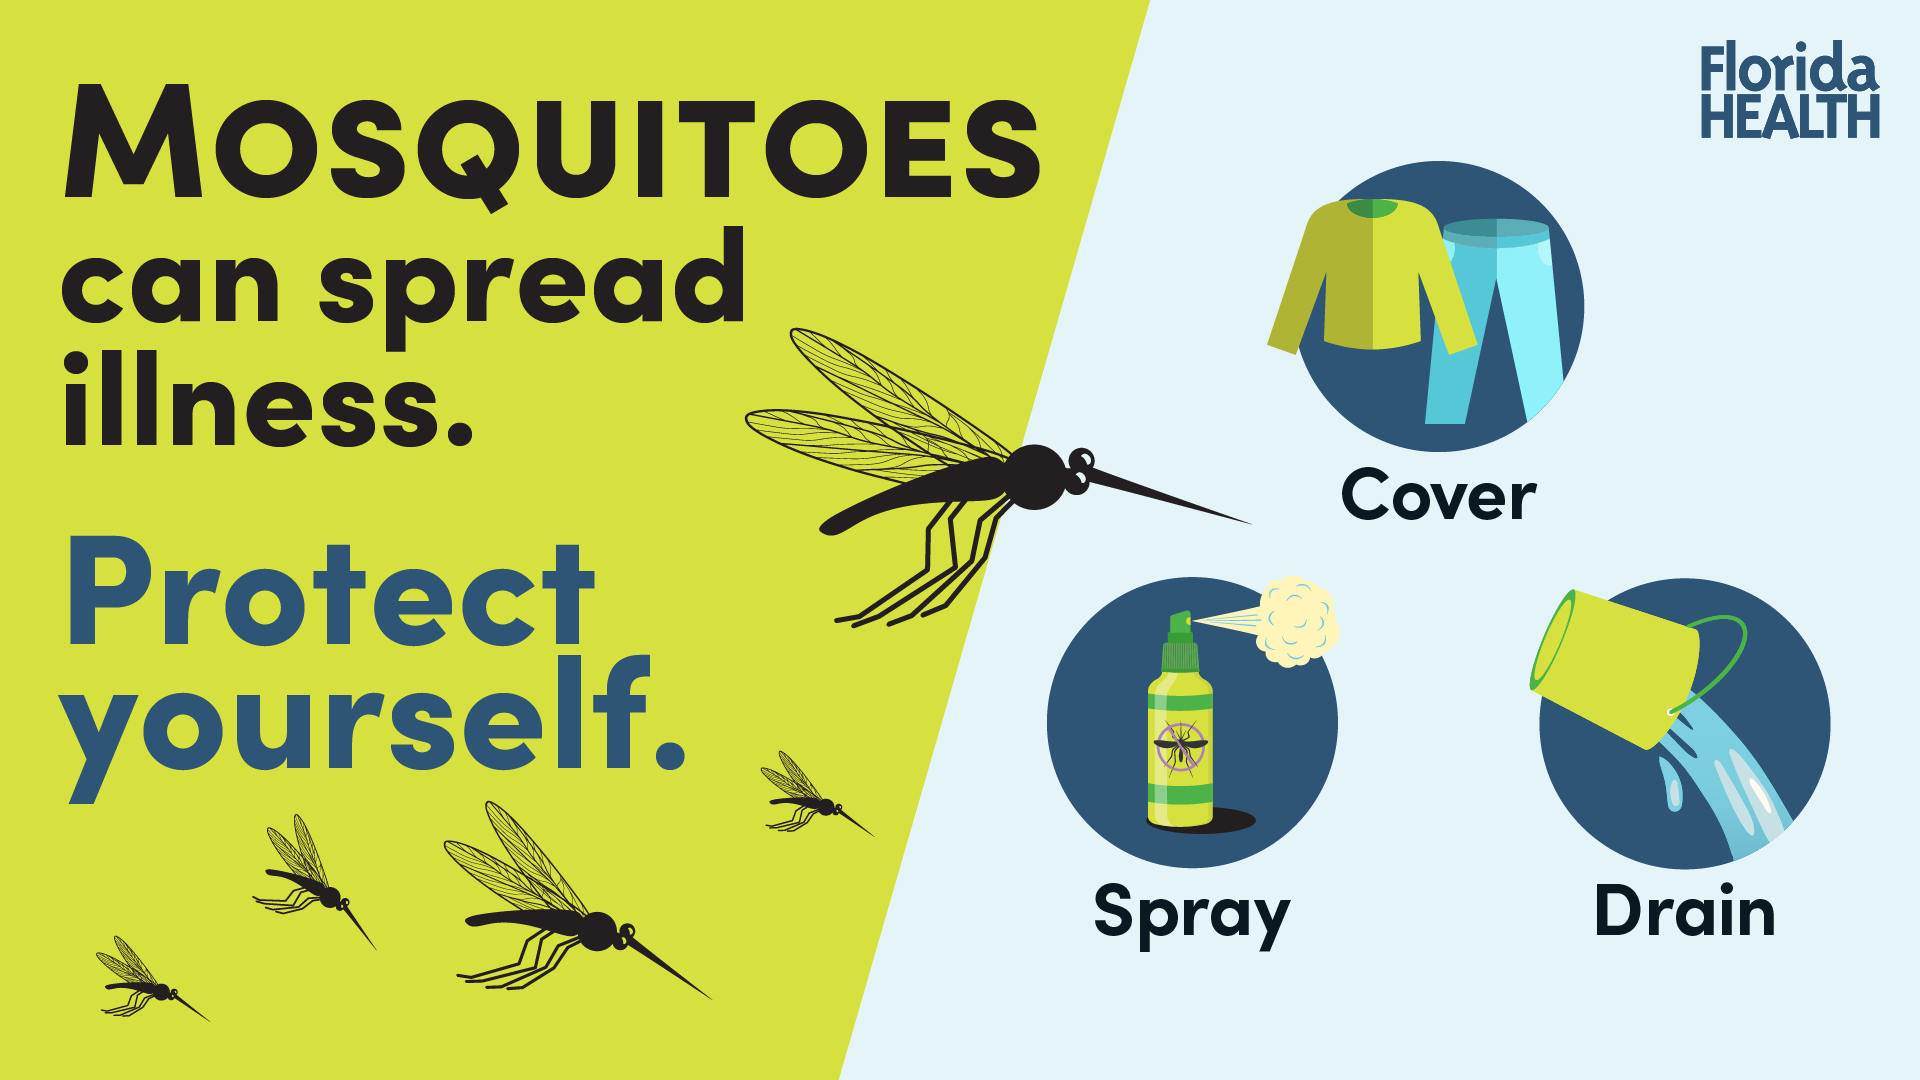 Mosquitoes can spread disease. Protect yourself.